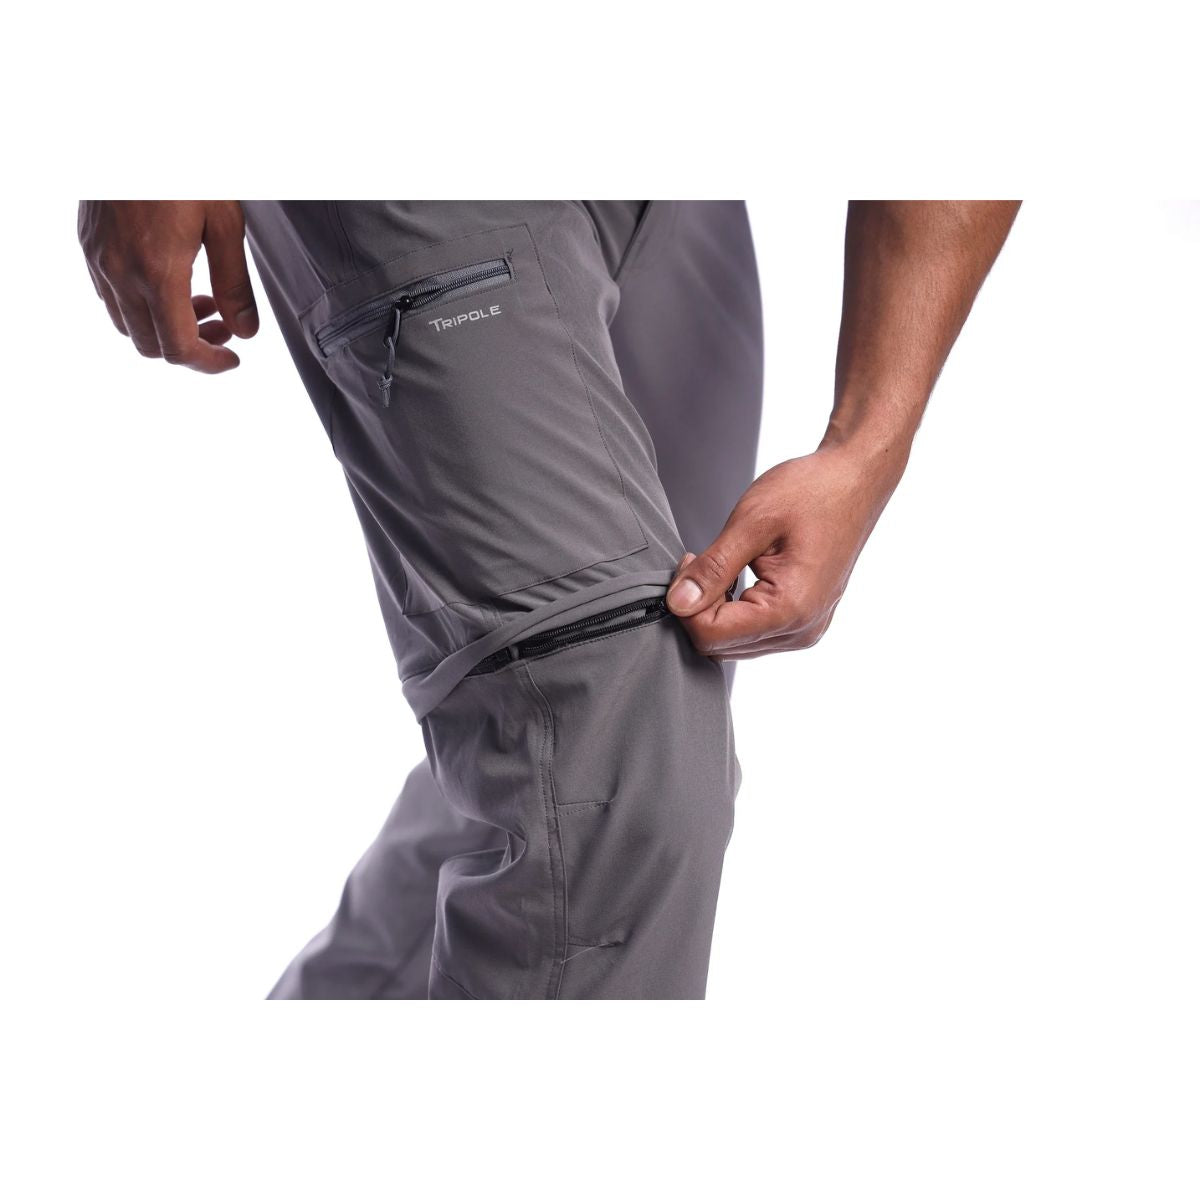 Men's Stretchable Pants for Trekking and Hiking Convertible to Shorts